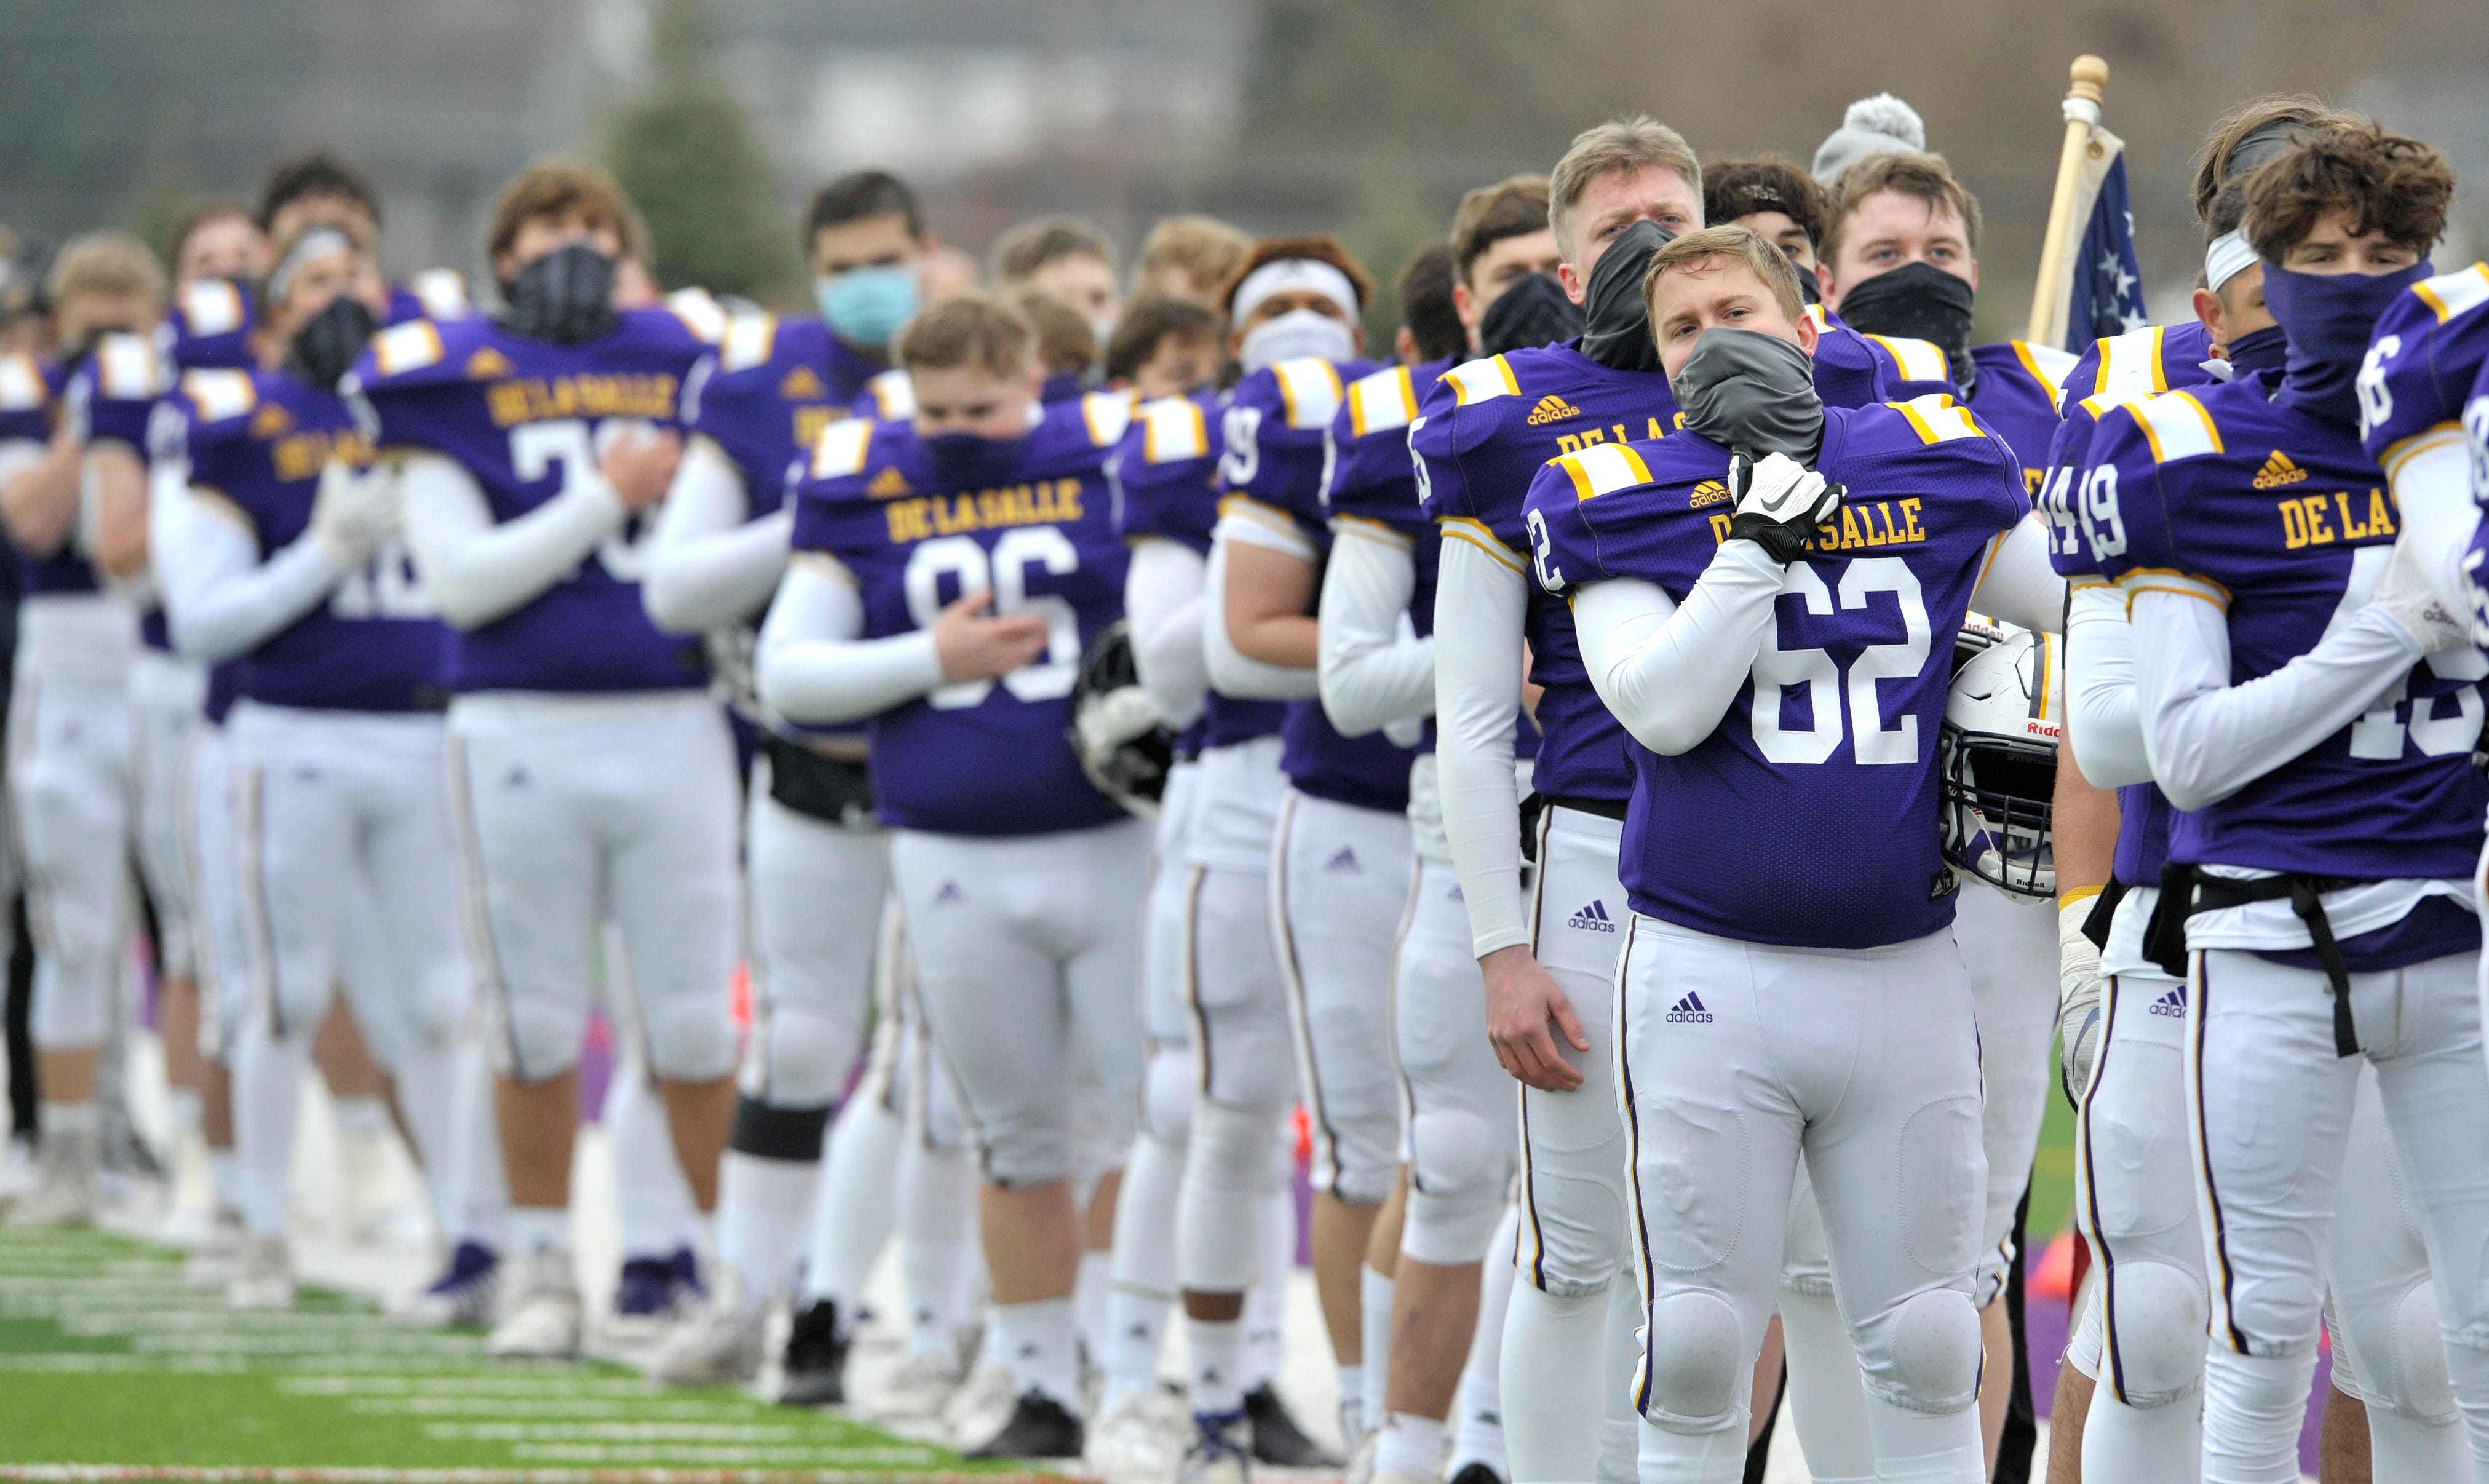 Members of the De La Salle football team stand during the playing the The National Anthem.